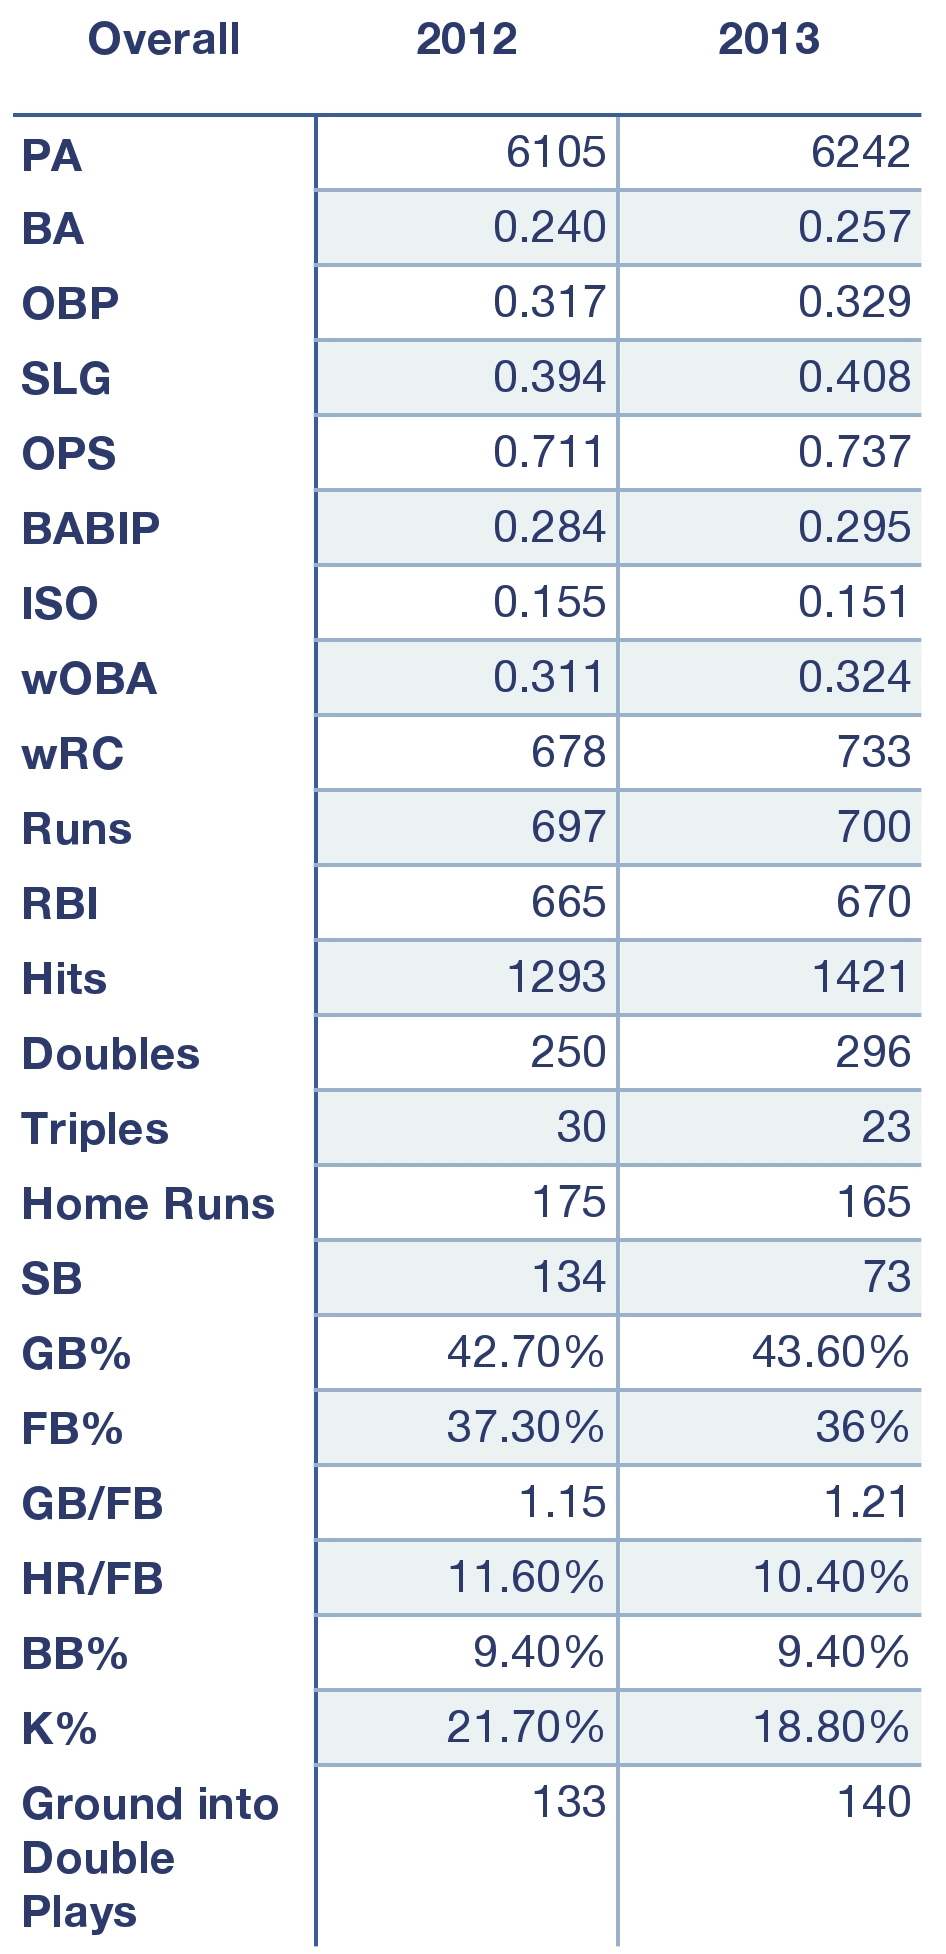 Rays overall offensive production in 2012 and 2013.